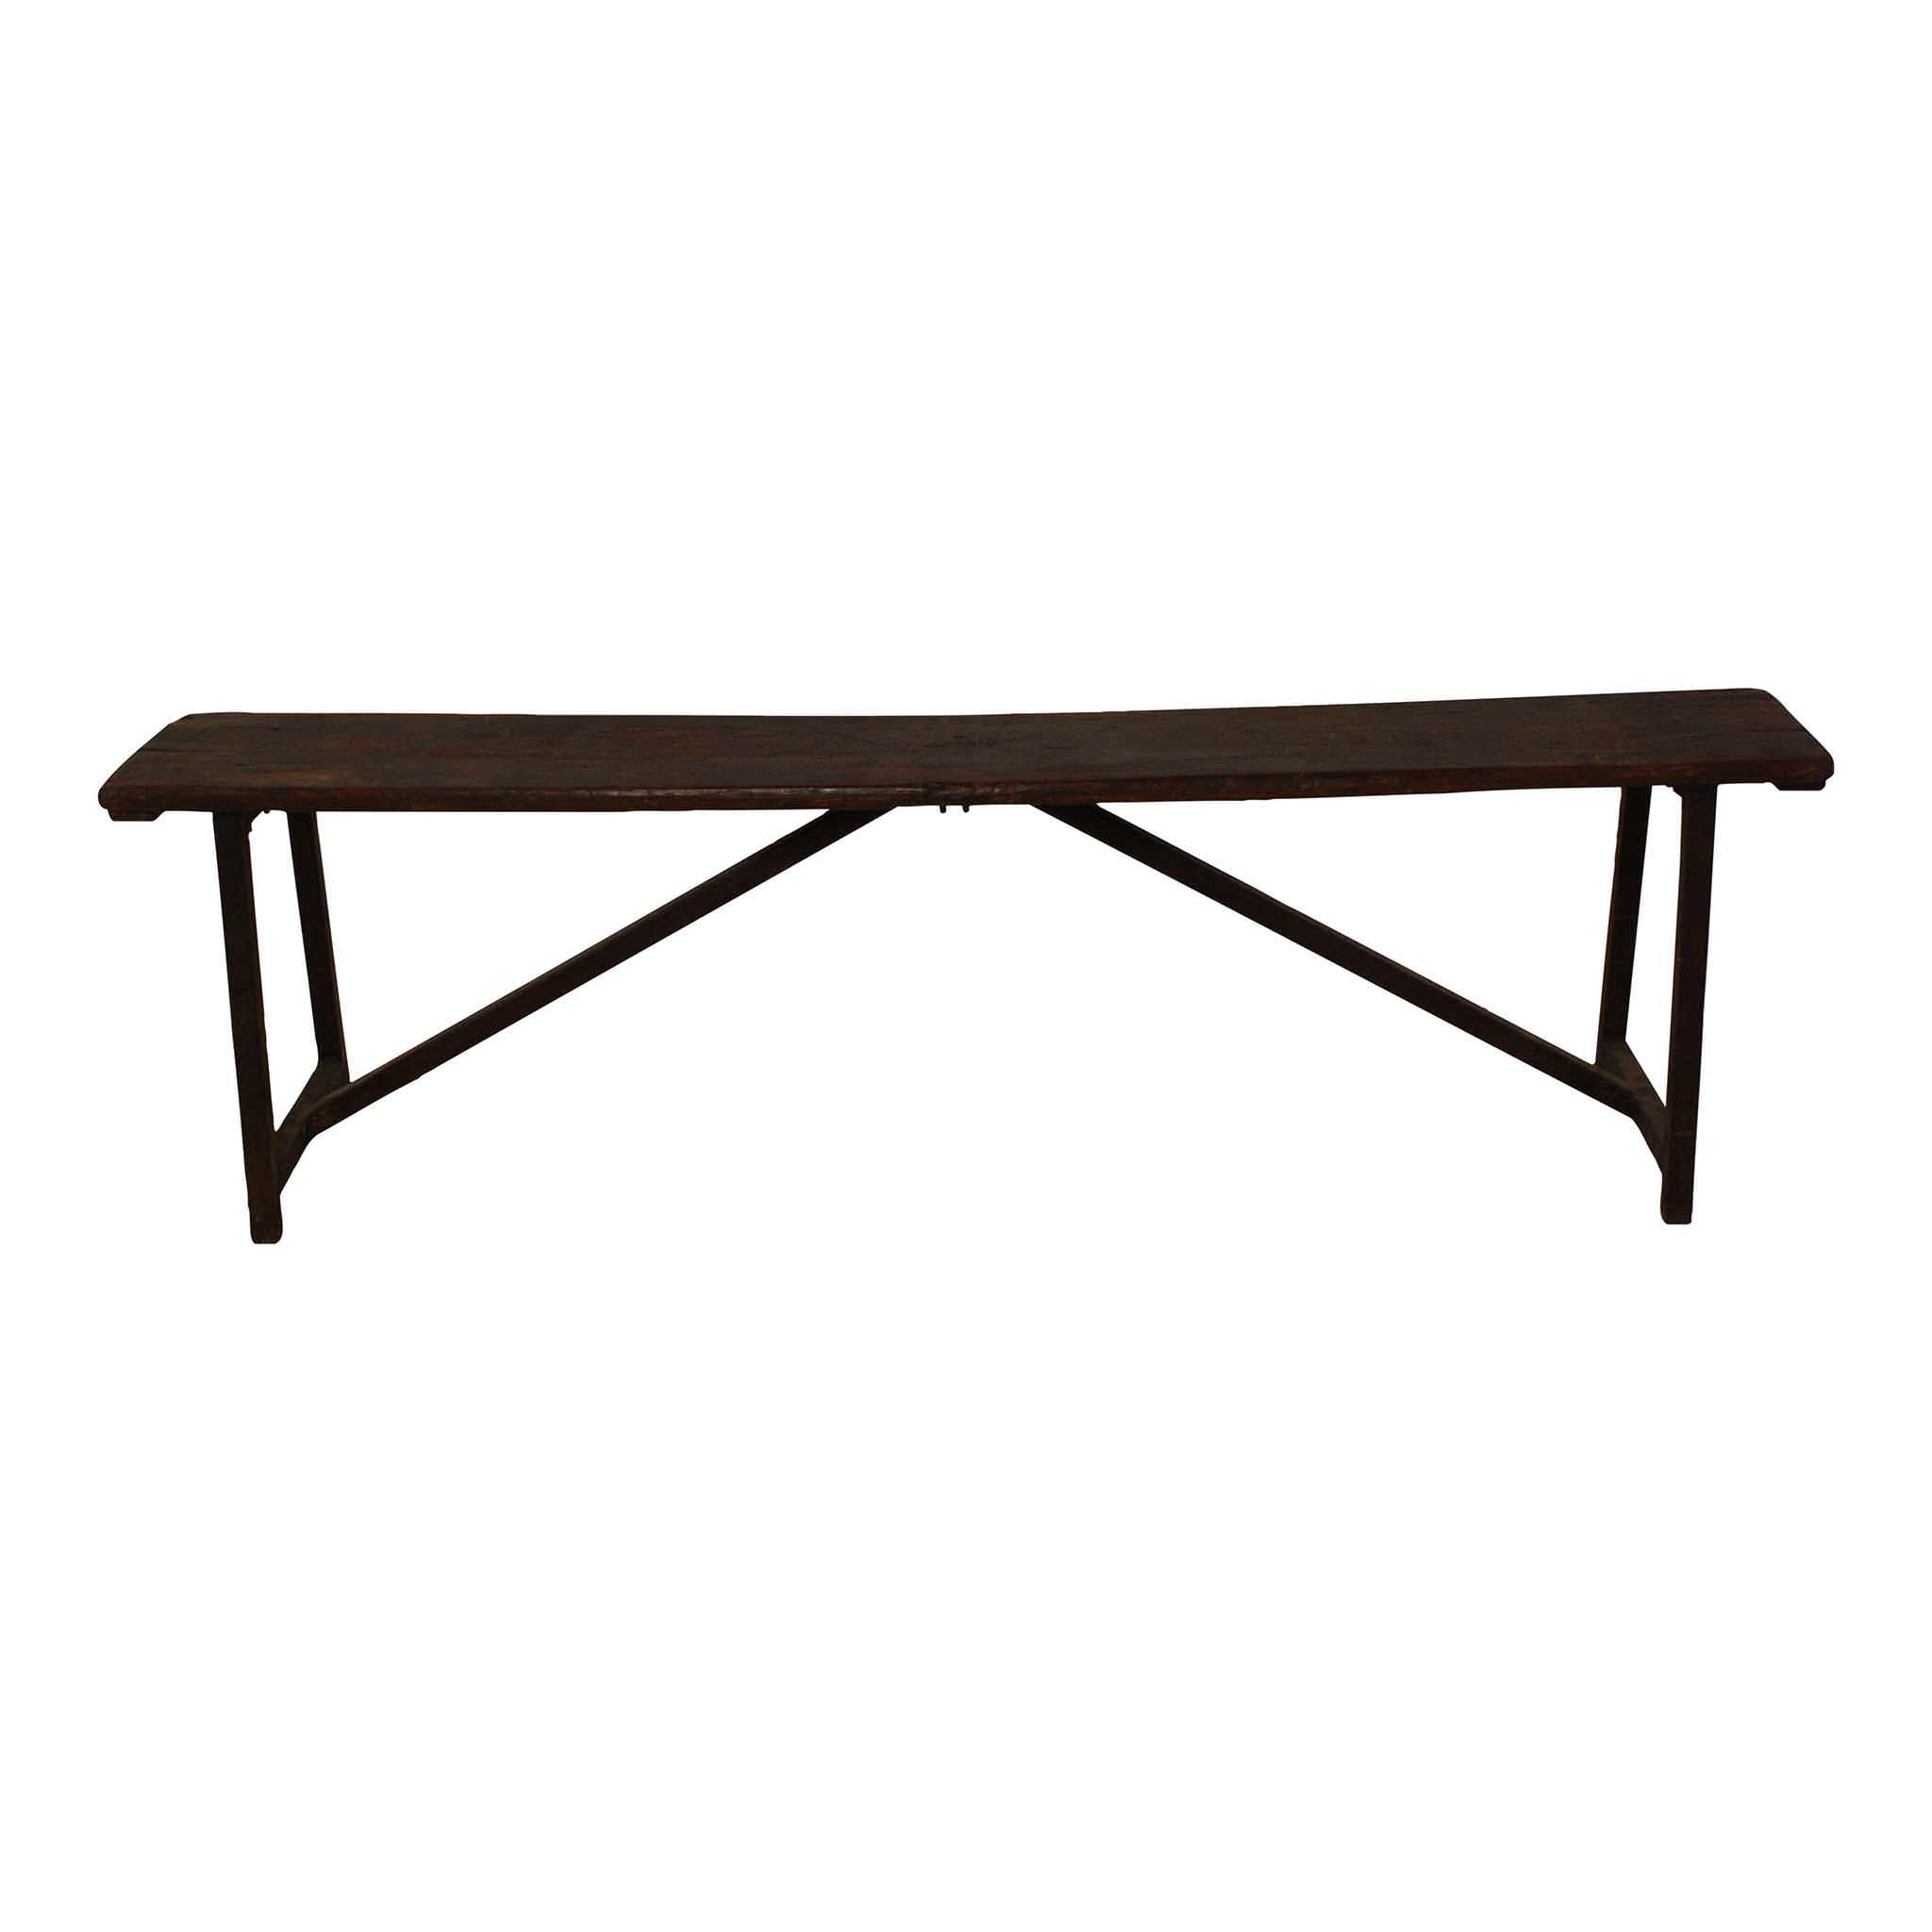 ski-country-antiques - Industrial Wood Bench with Steel Legs